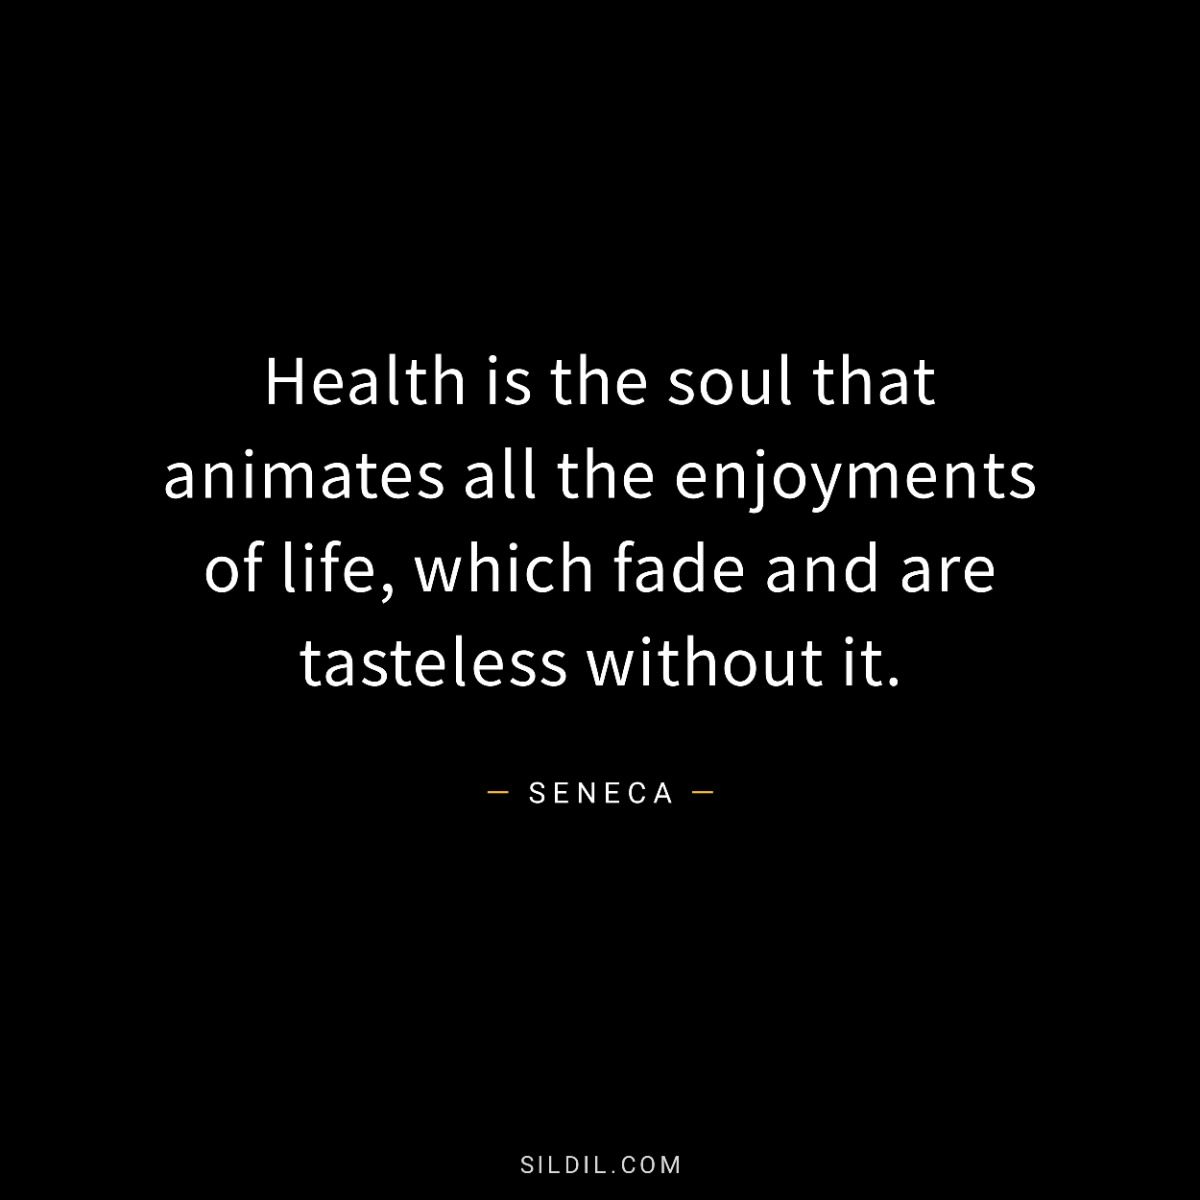 Health is the soul that animates all the enjoyments of life, which fade and are tasteless without it.